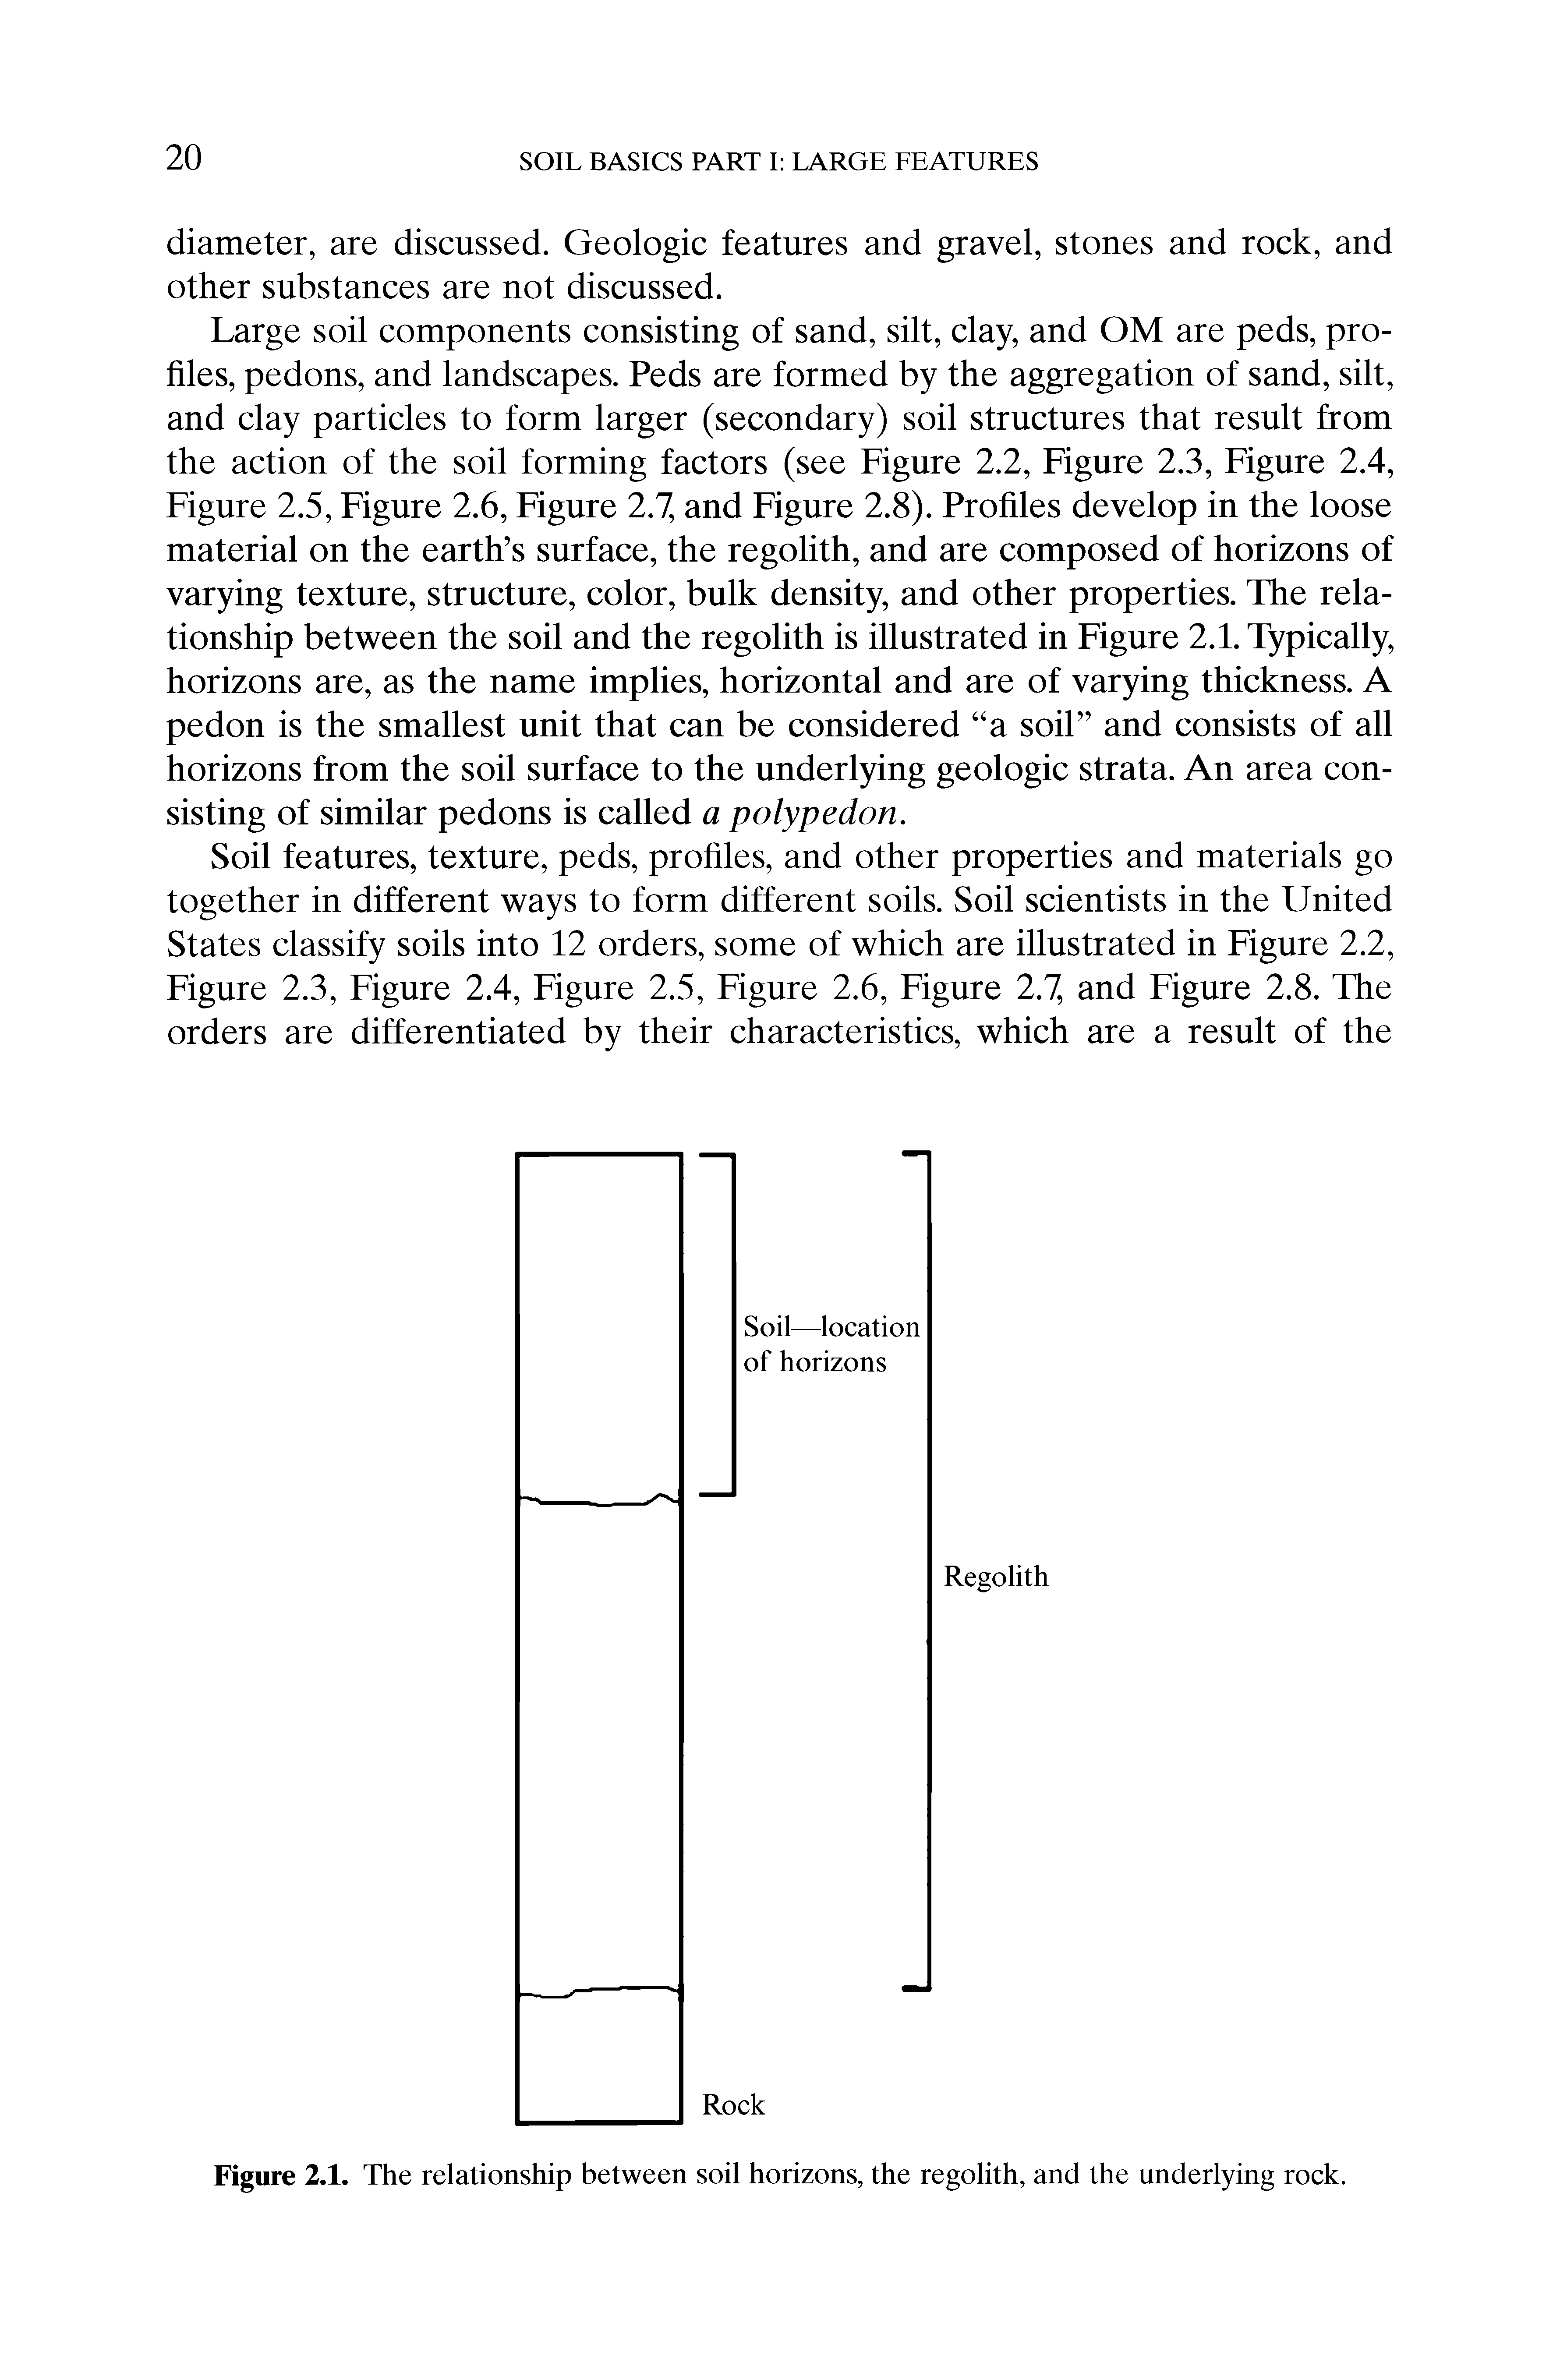 Figure 2.1. The relationship between soil horizons, the regolith, and the underlying rock.